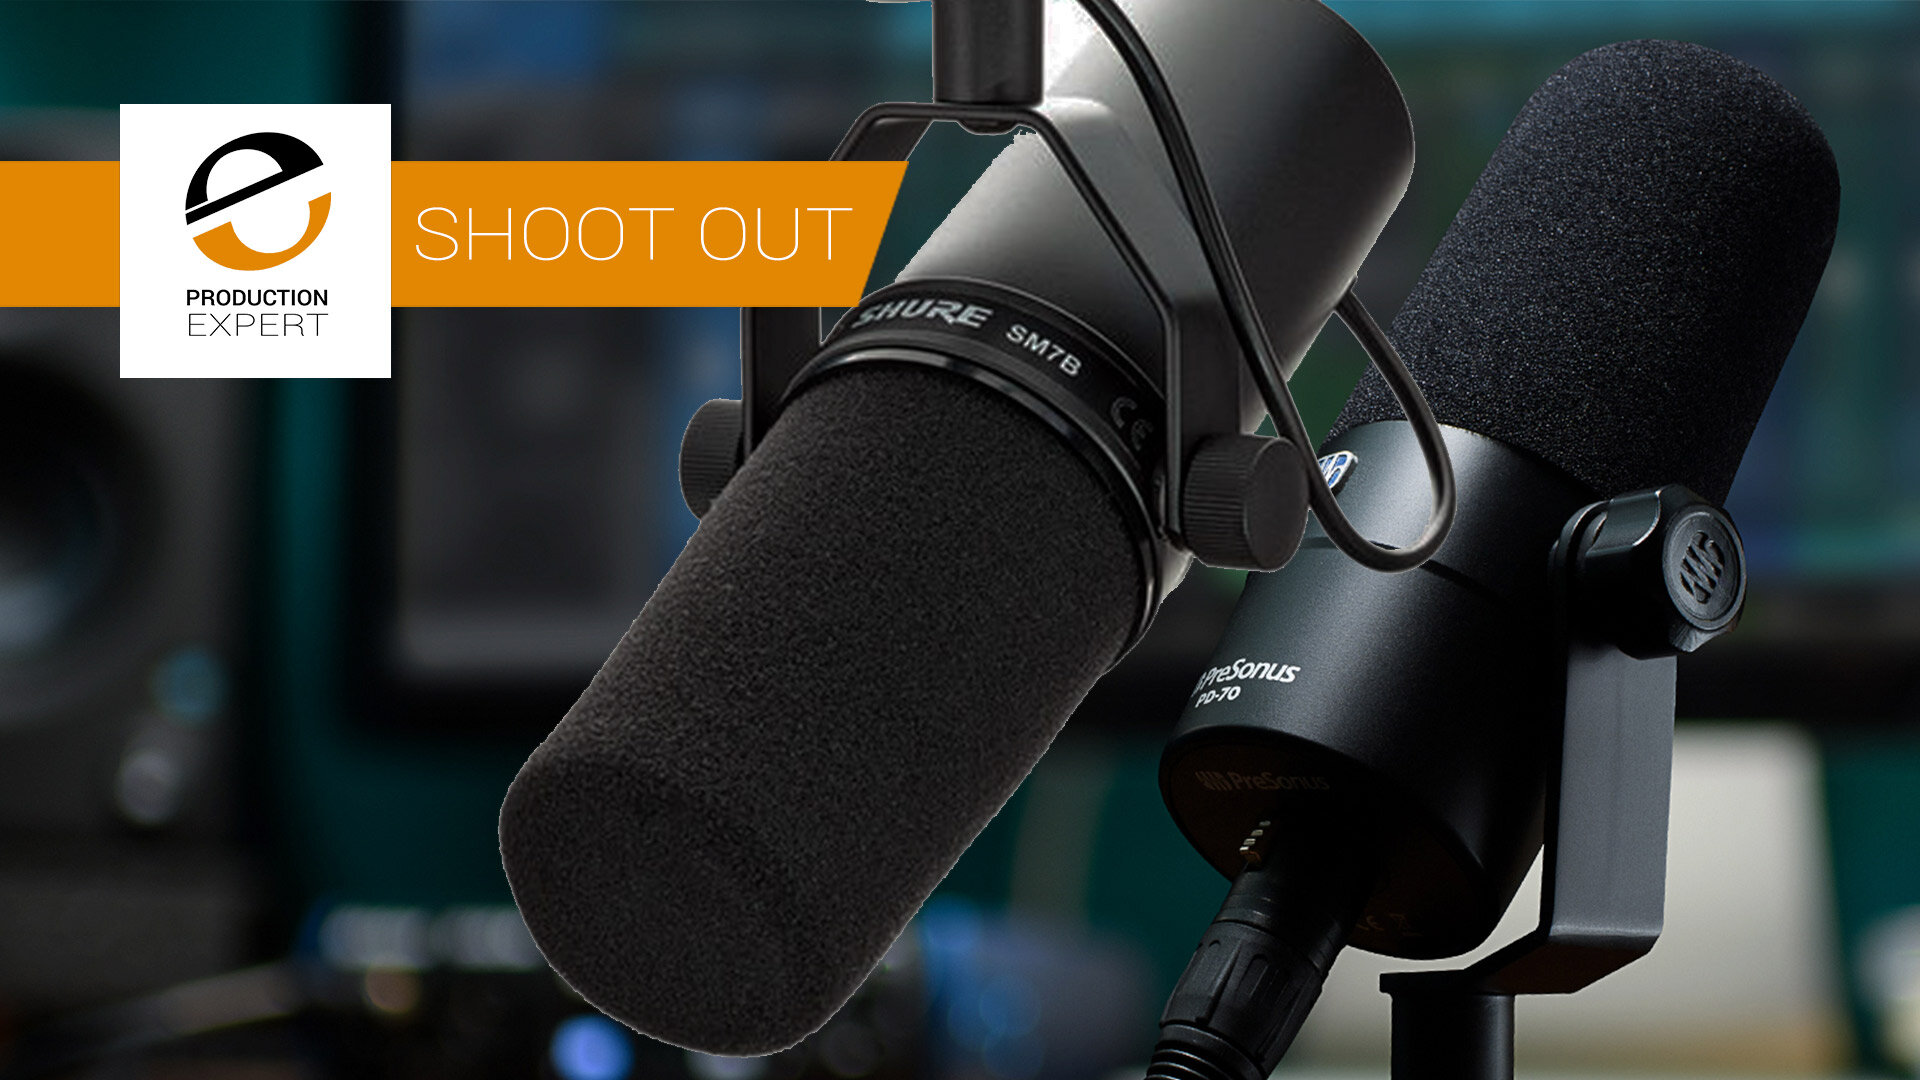 Presonus Pd70 And Shure Sm7b Shootout Can You Tell Which One Is Which Pro Tools Production Expert